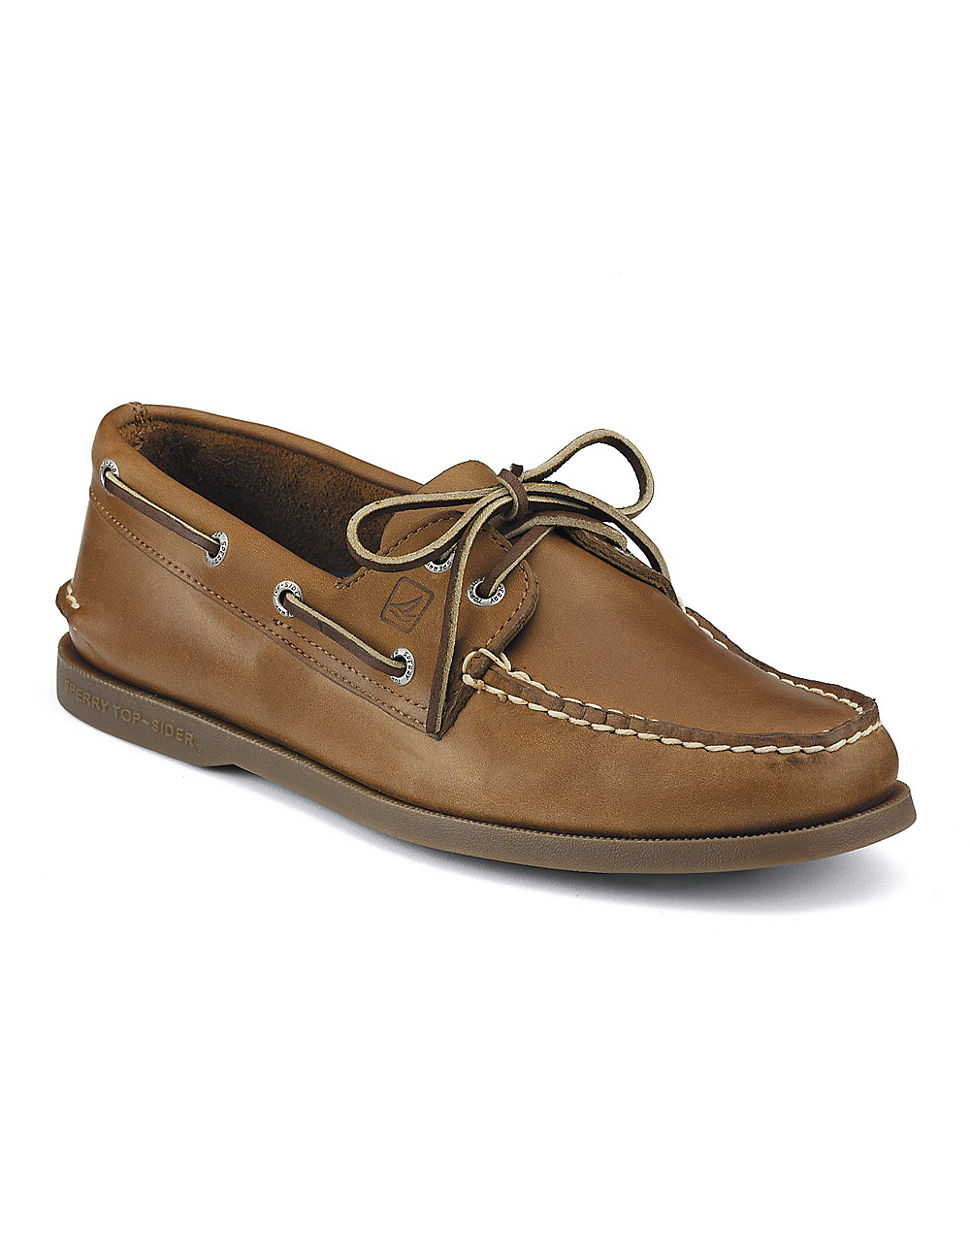 Sperry top-sider Authentic Original 2-eye Leather Boat Shoes in Brown ...